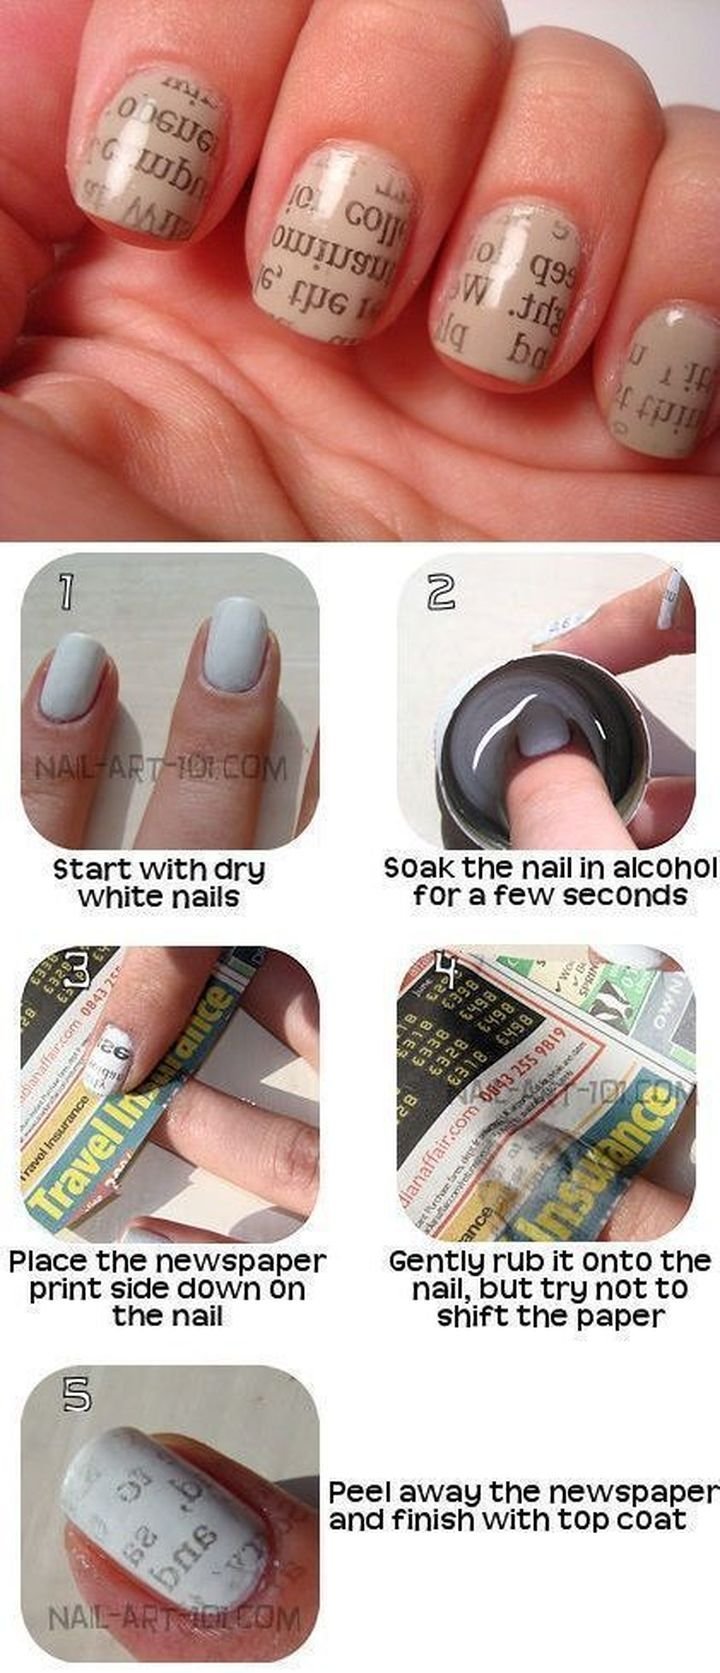 5 quick hacks to dry your nail polish